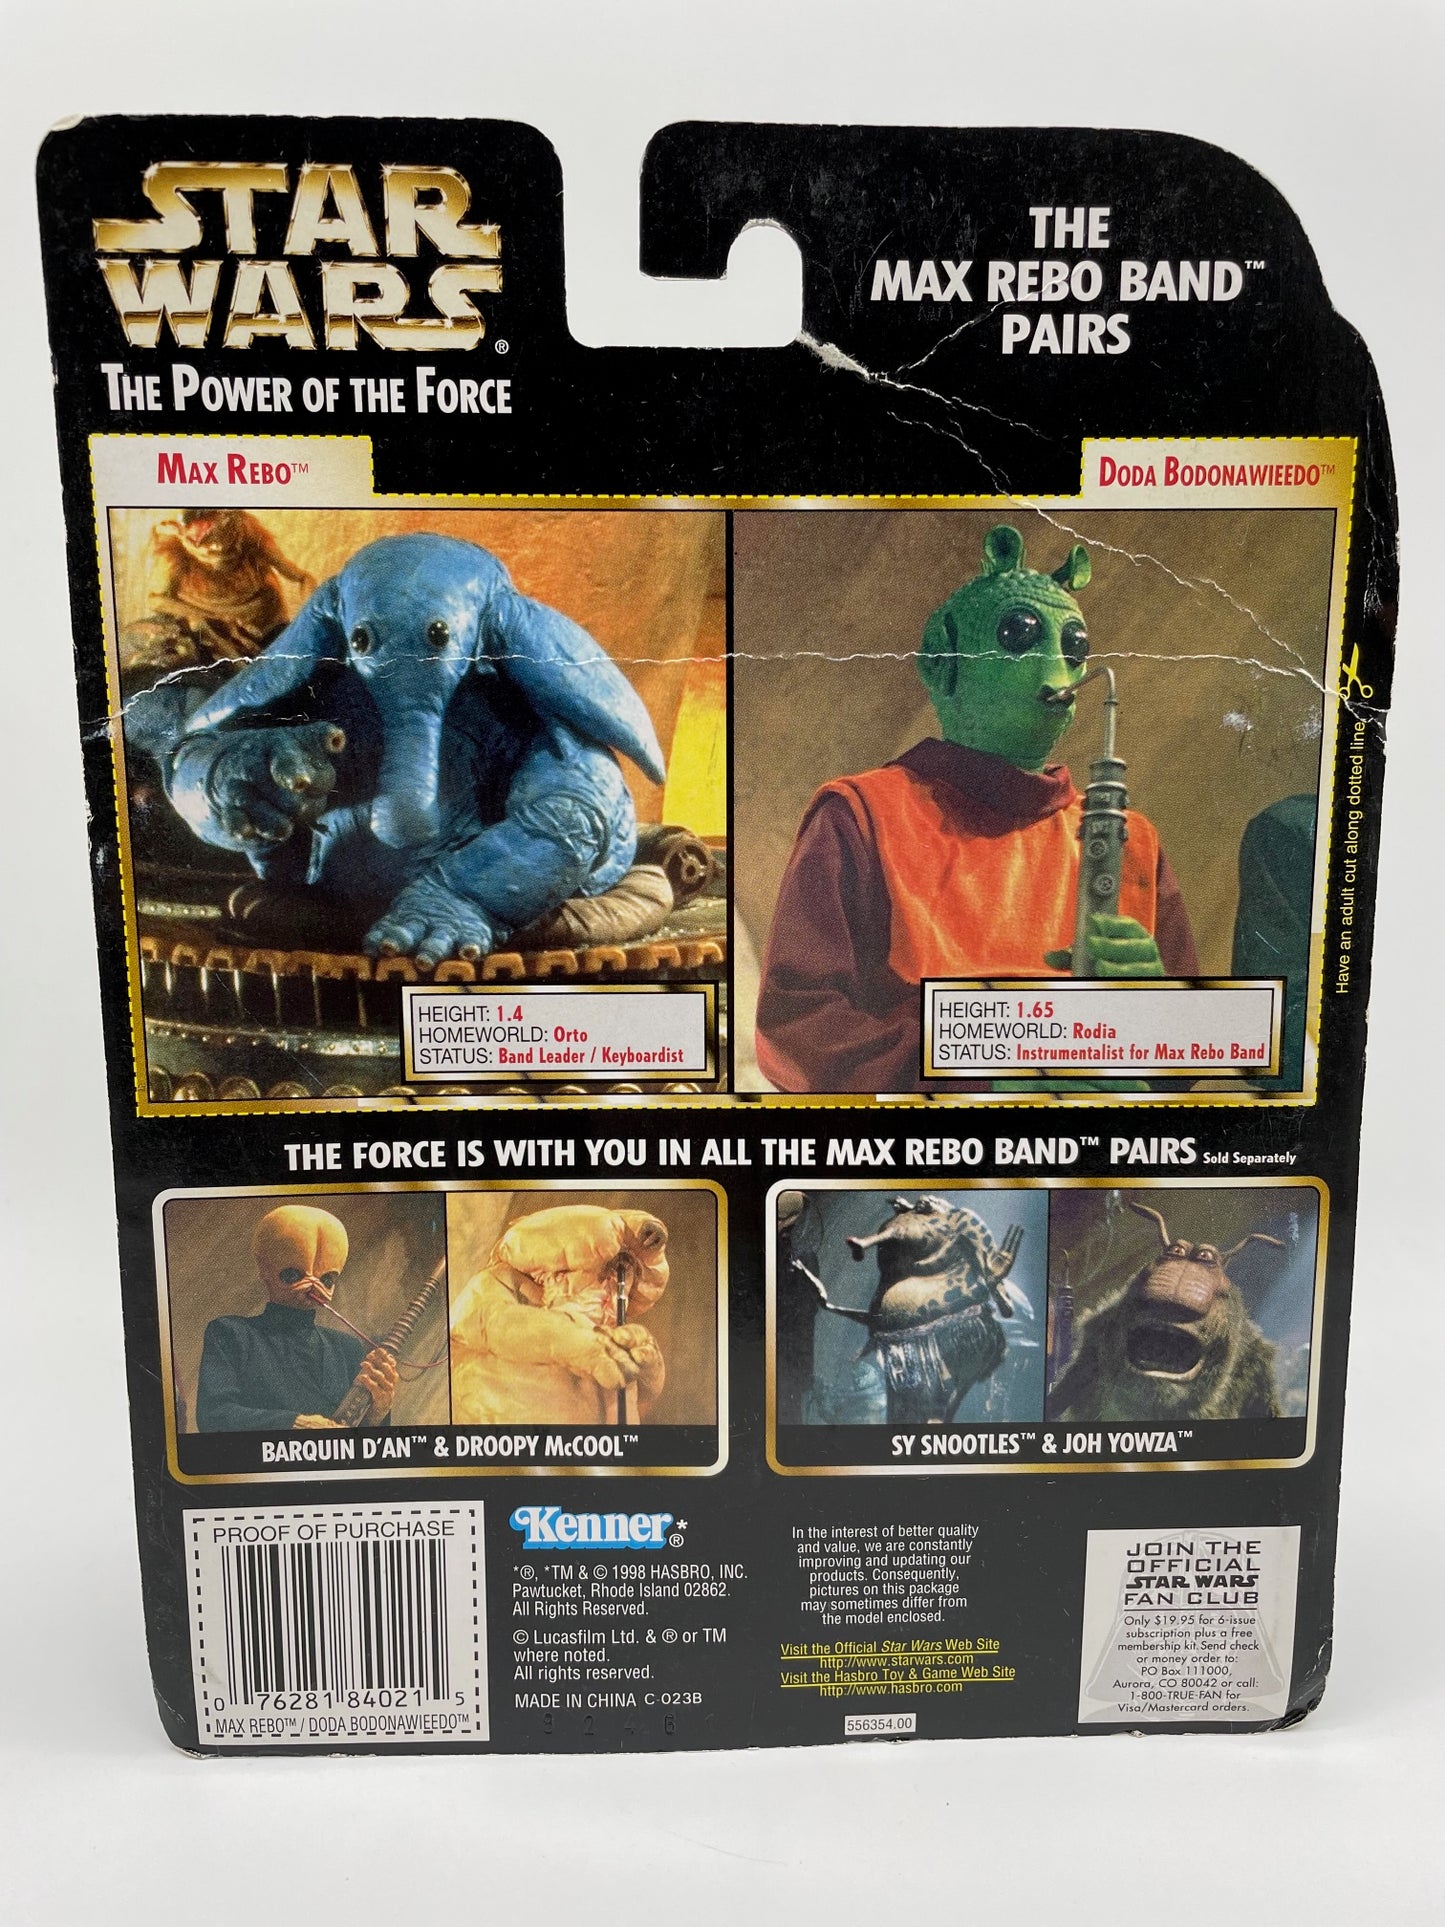 Power of the Force Max Rebo Band Pair Action Figure Set, Hasbro 1998